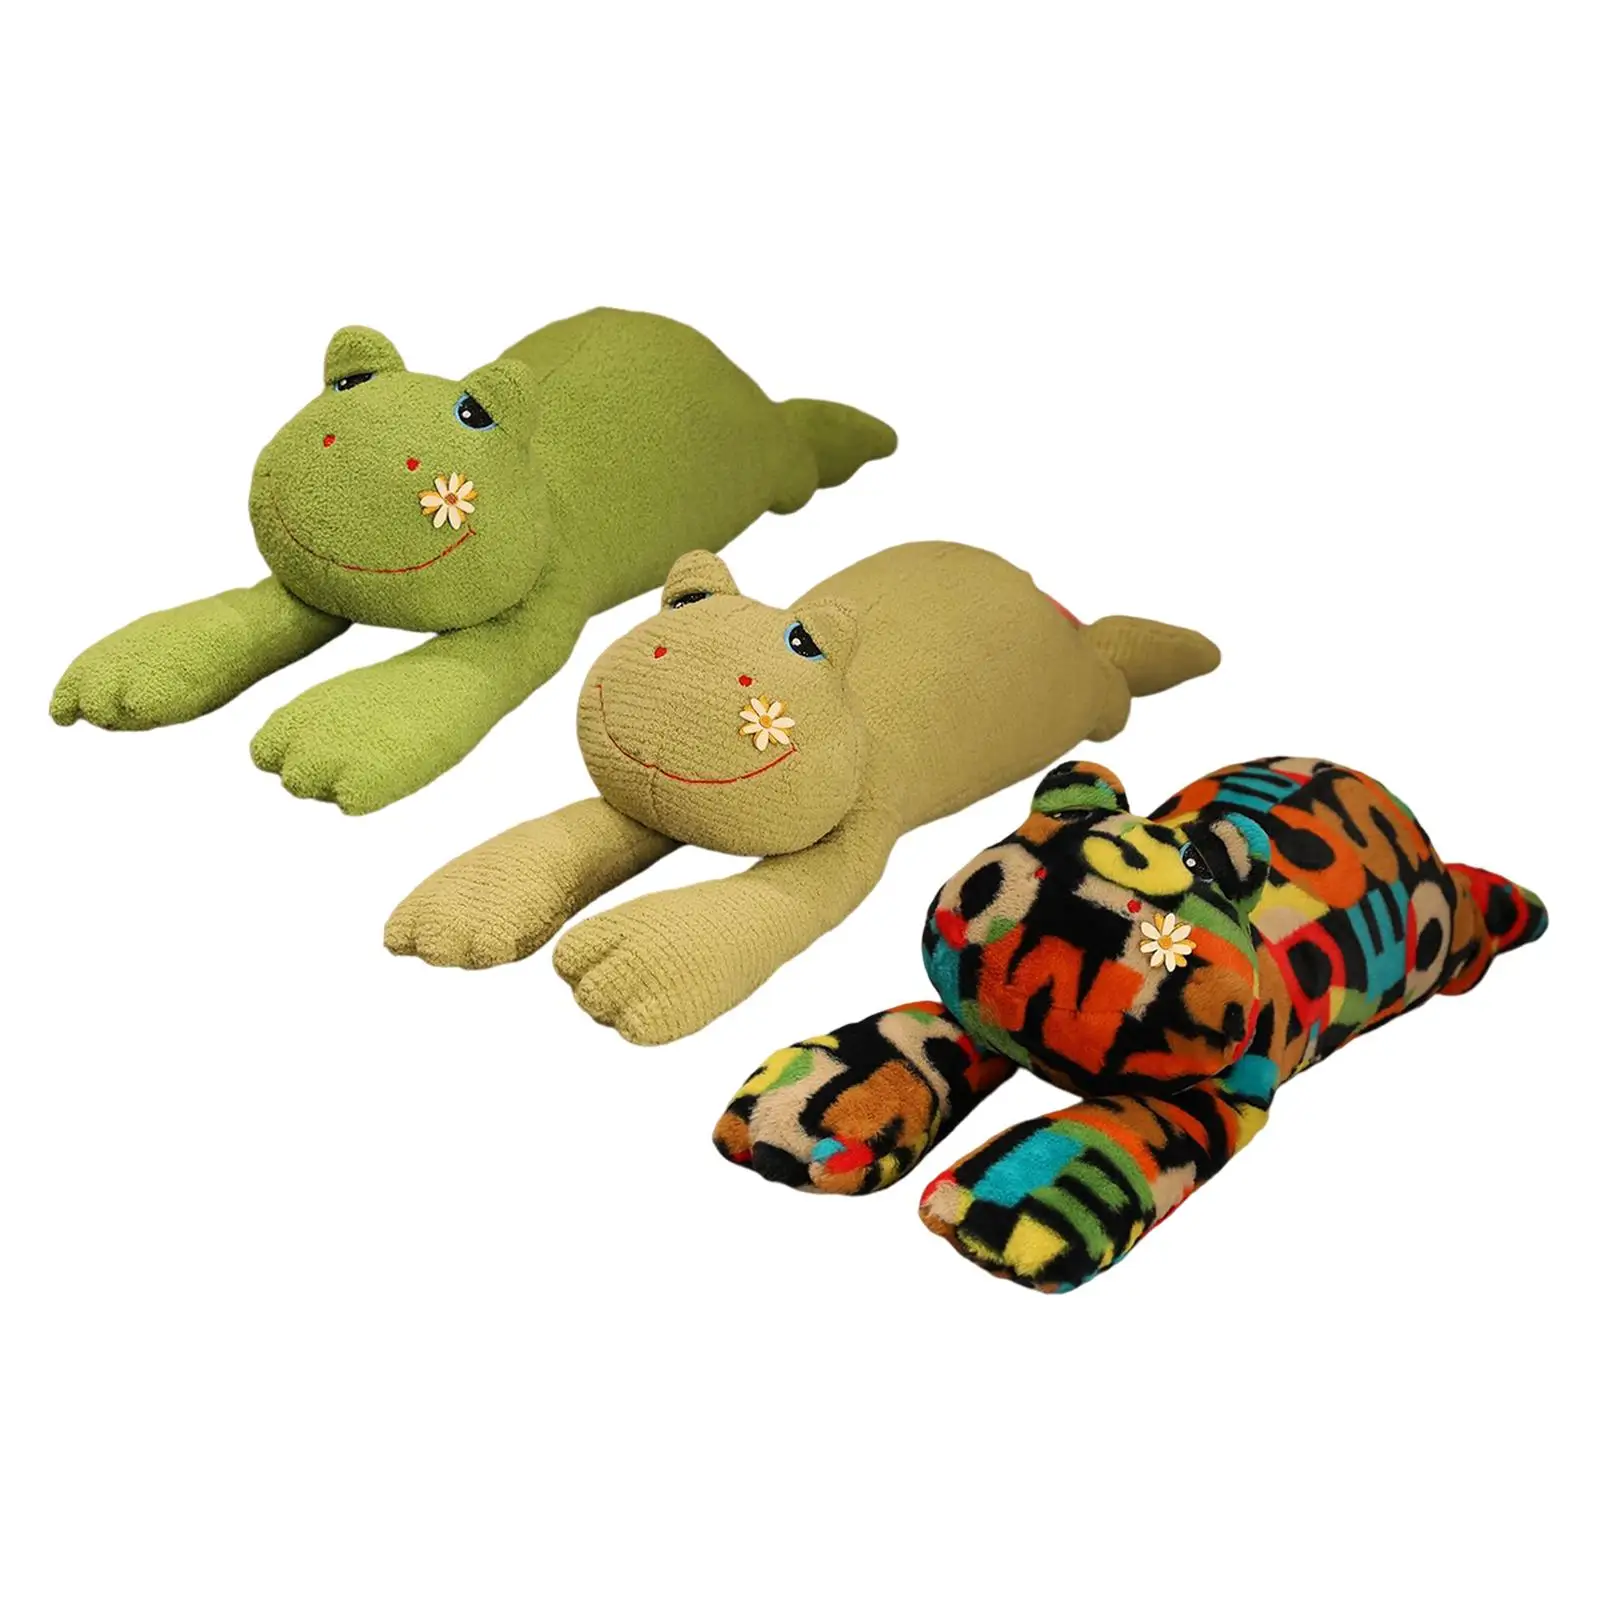 Adorable Frog Plush Toy Pillow Home Decoration Soft Stuffed Animal for Party Sofa Decor Birthday Gifts Toddlers Children